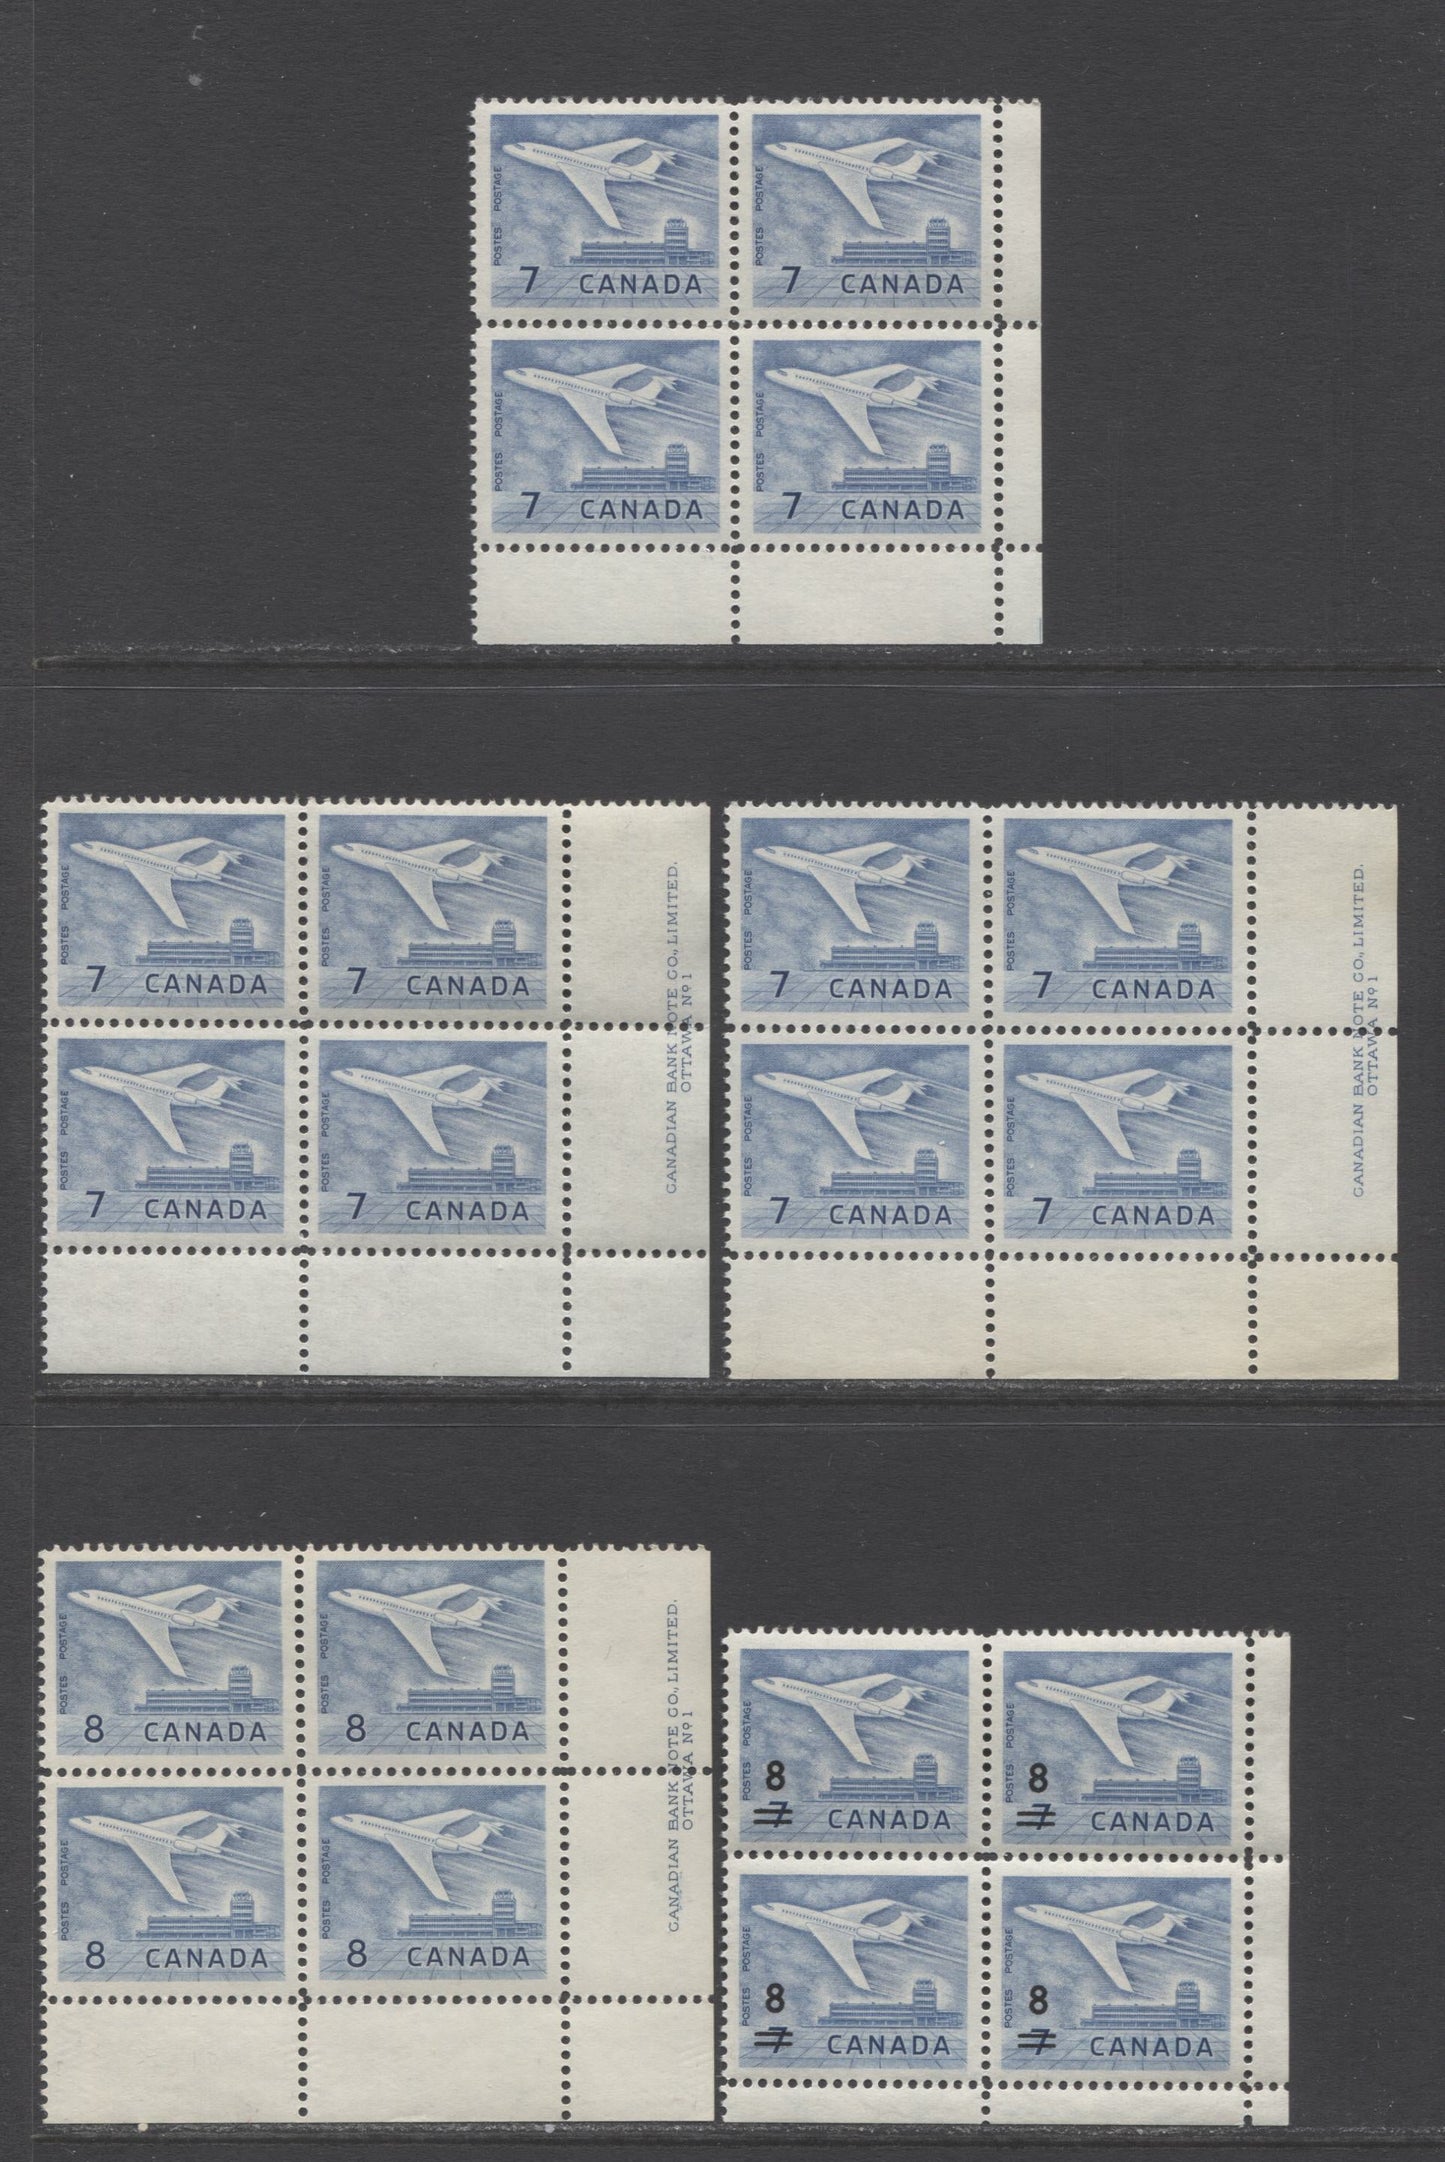 Lot 148 Canada #414, 430, 436 7c, 8c on 7c & 8c Blue Jet Plane, 1964 Jet Definitives & Overprint Issues, 5 VFNH LR Plate 1 & Field Stock Blocks Of 4 With Paper, Shade & Gum Varieties